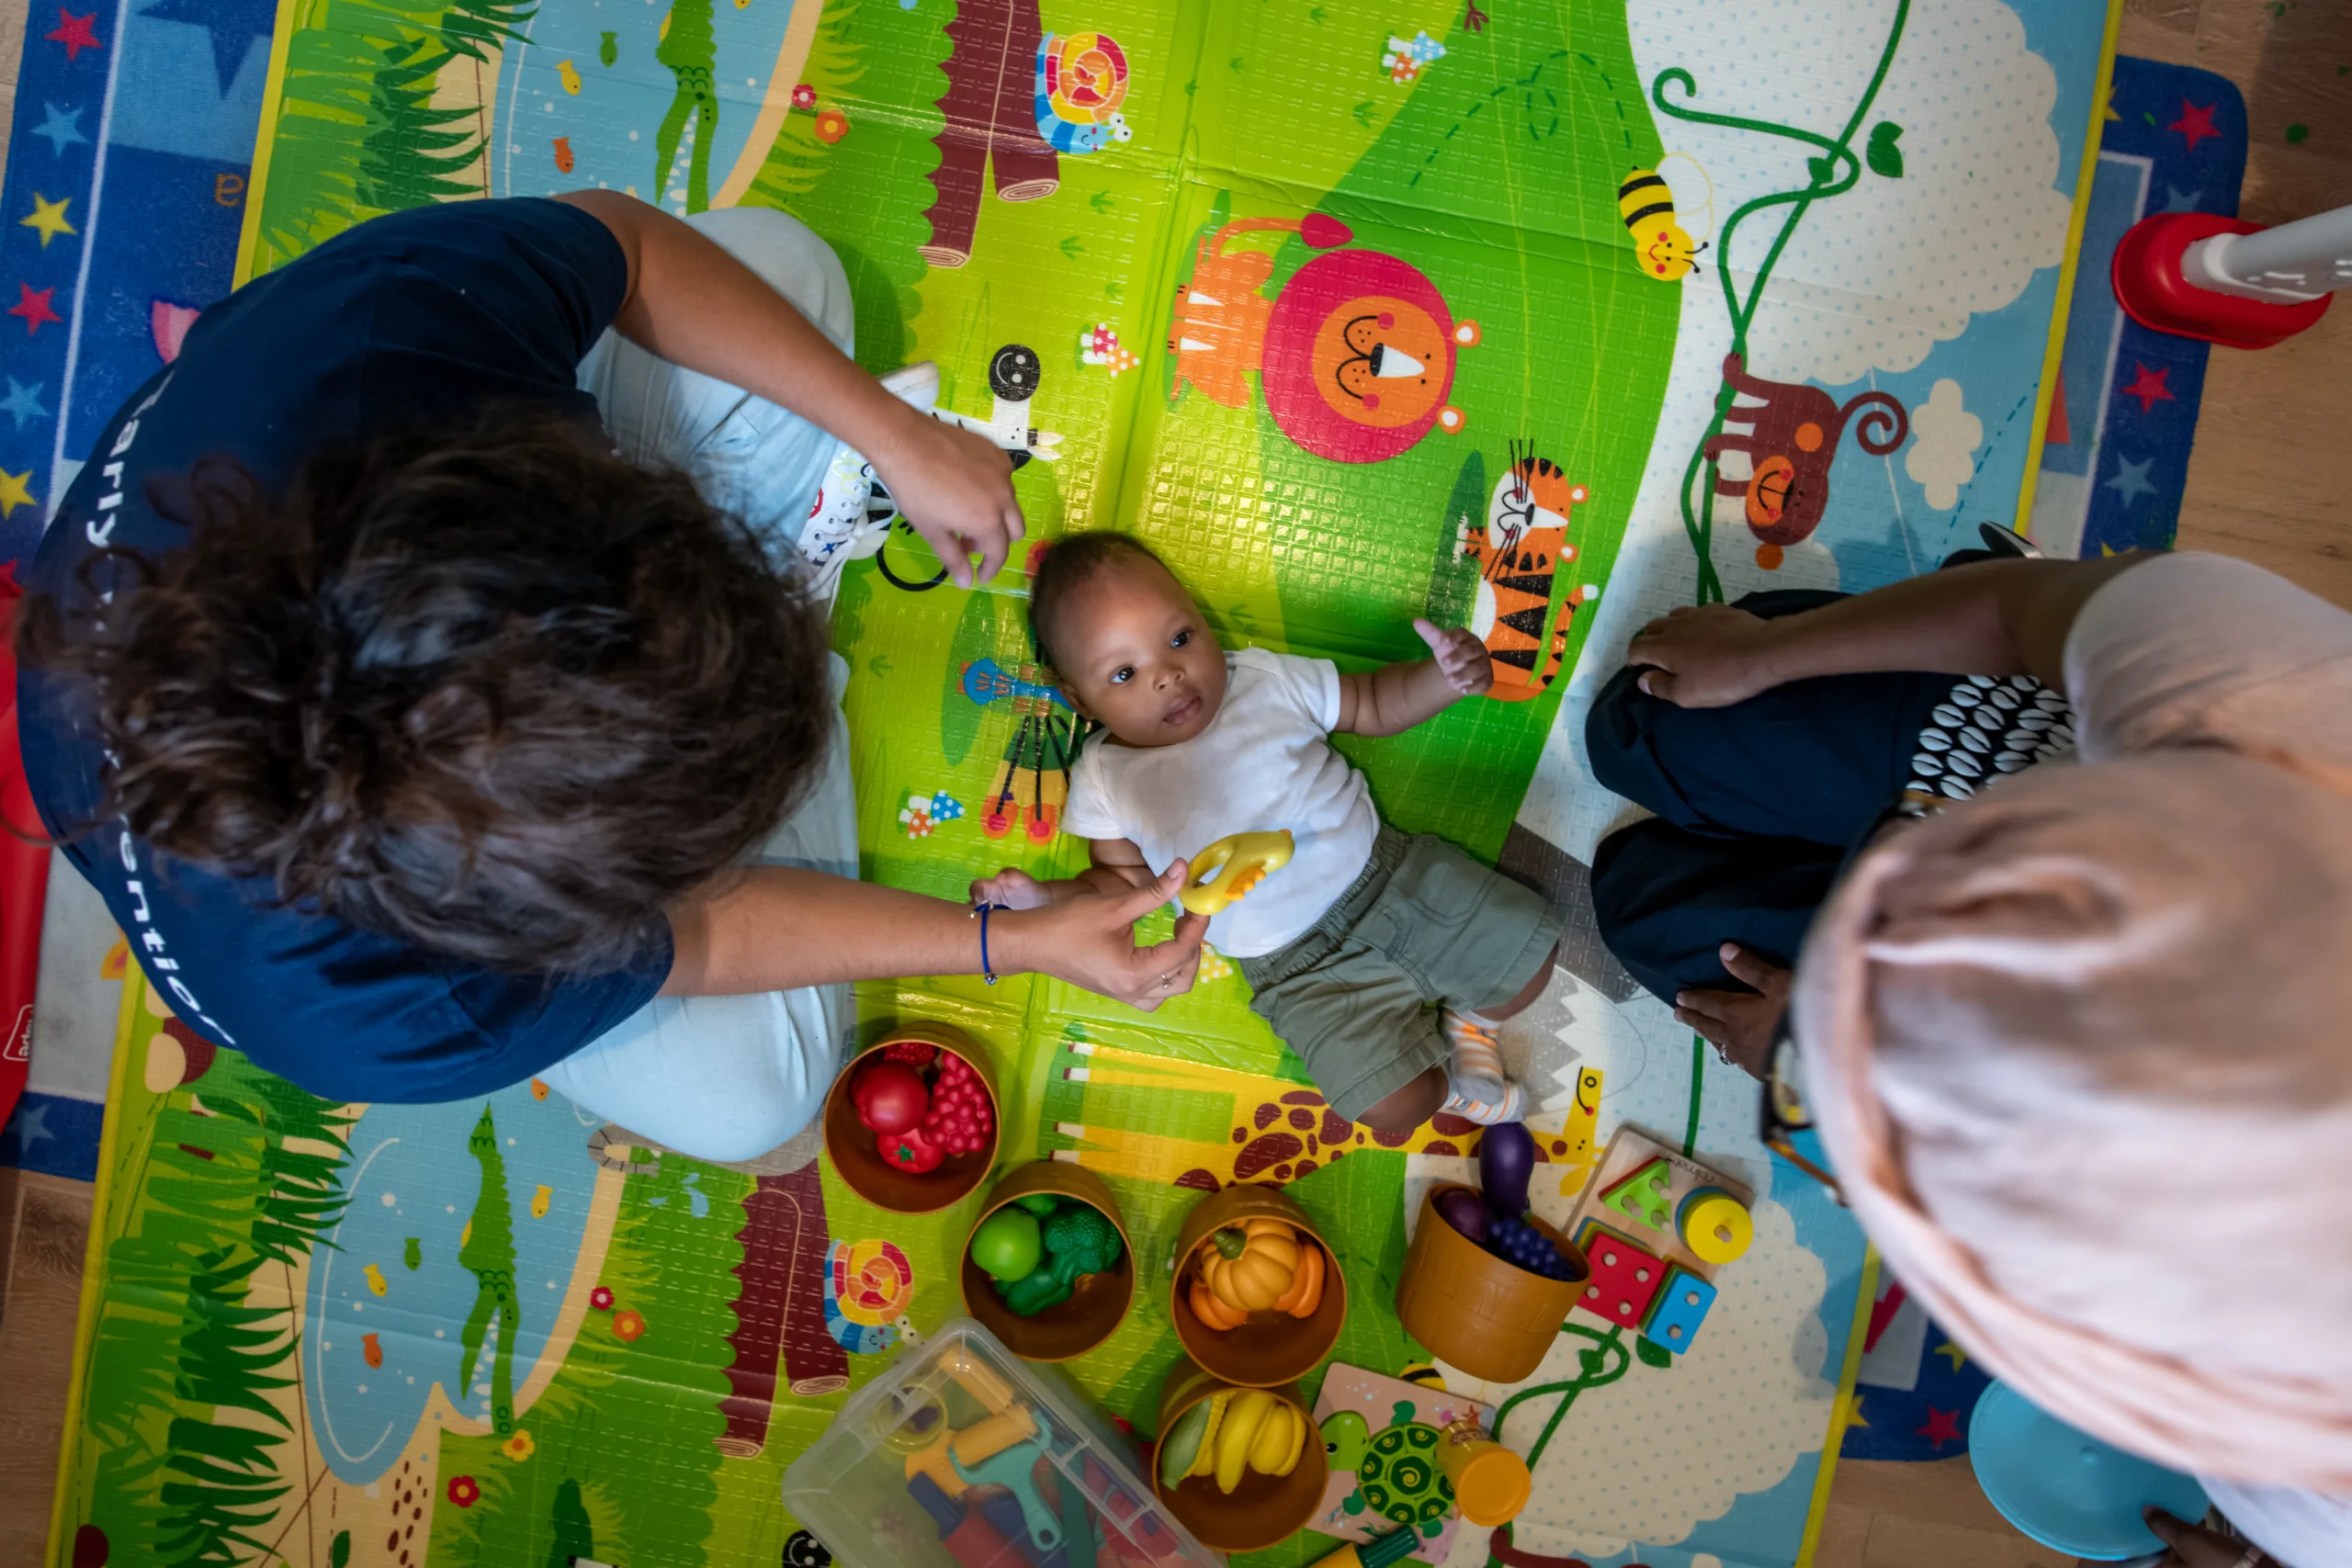 Two caregivers engaging and playing with an infant on a play mat with sensory toys.